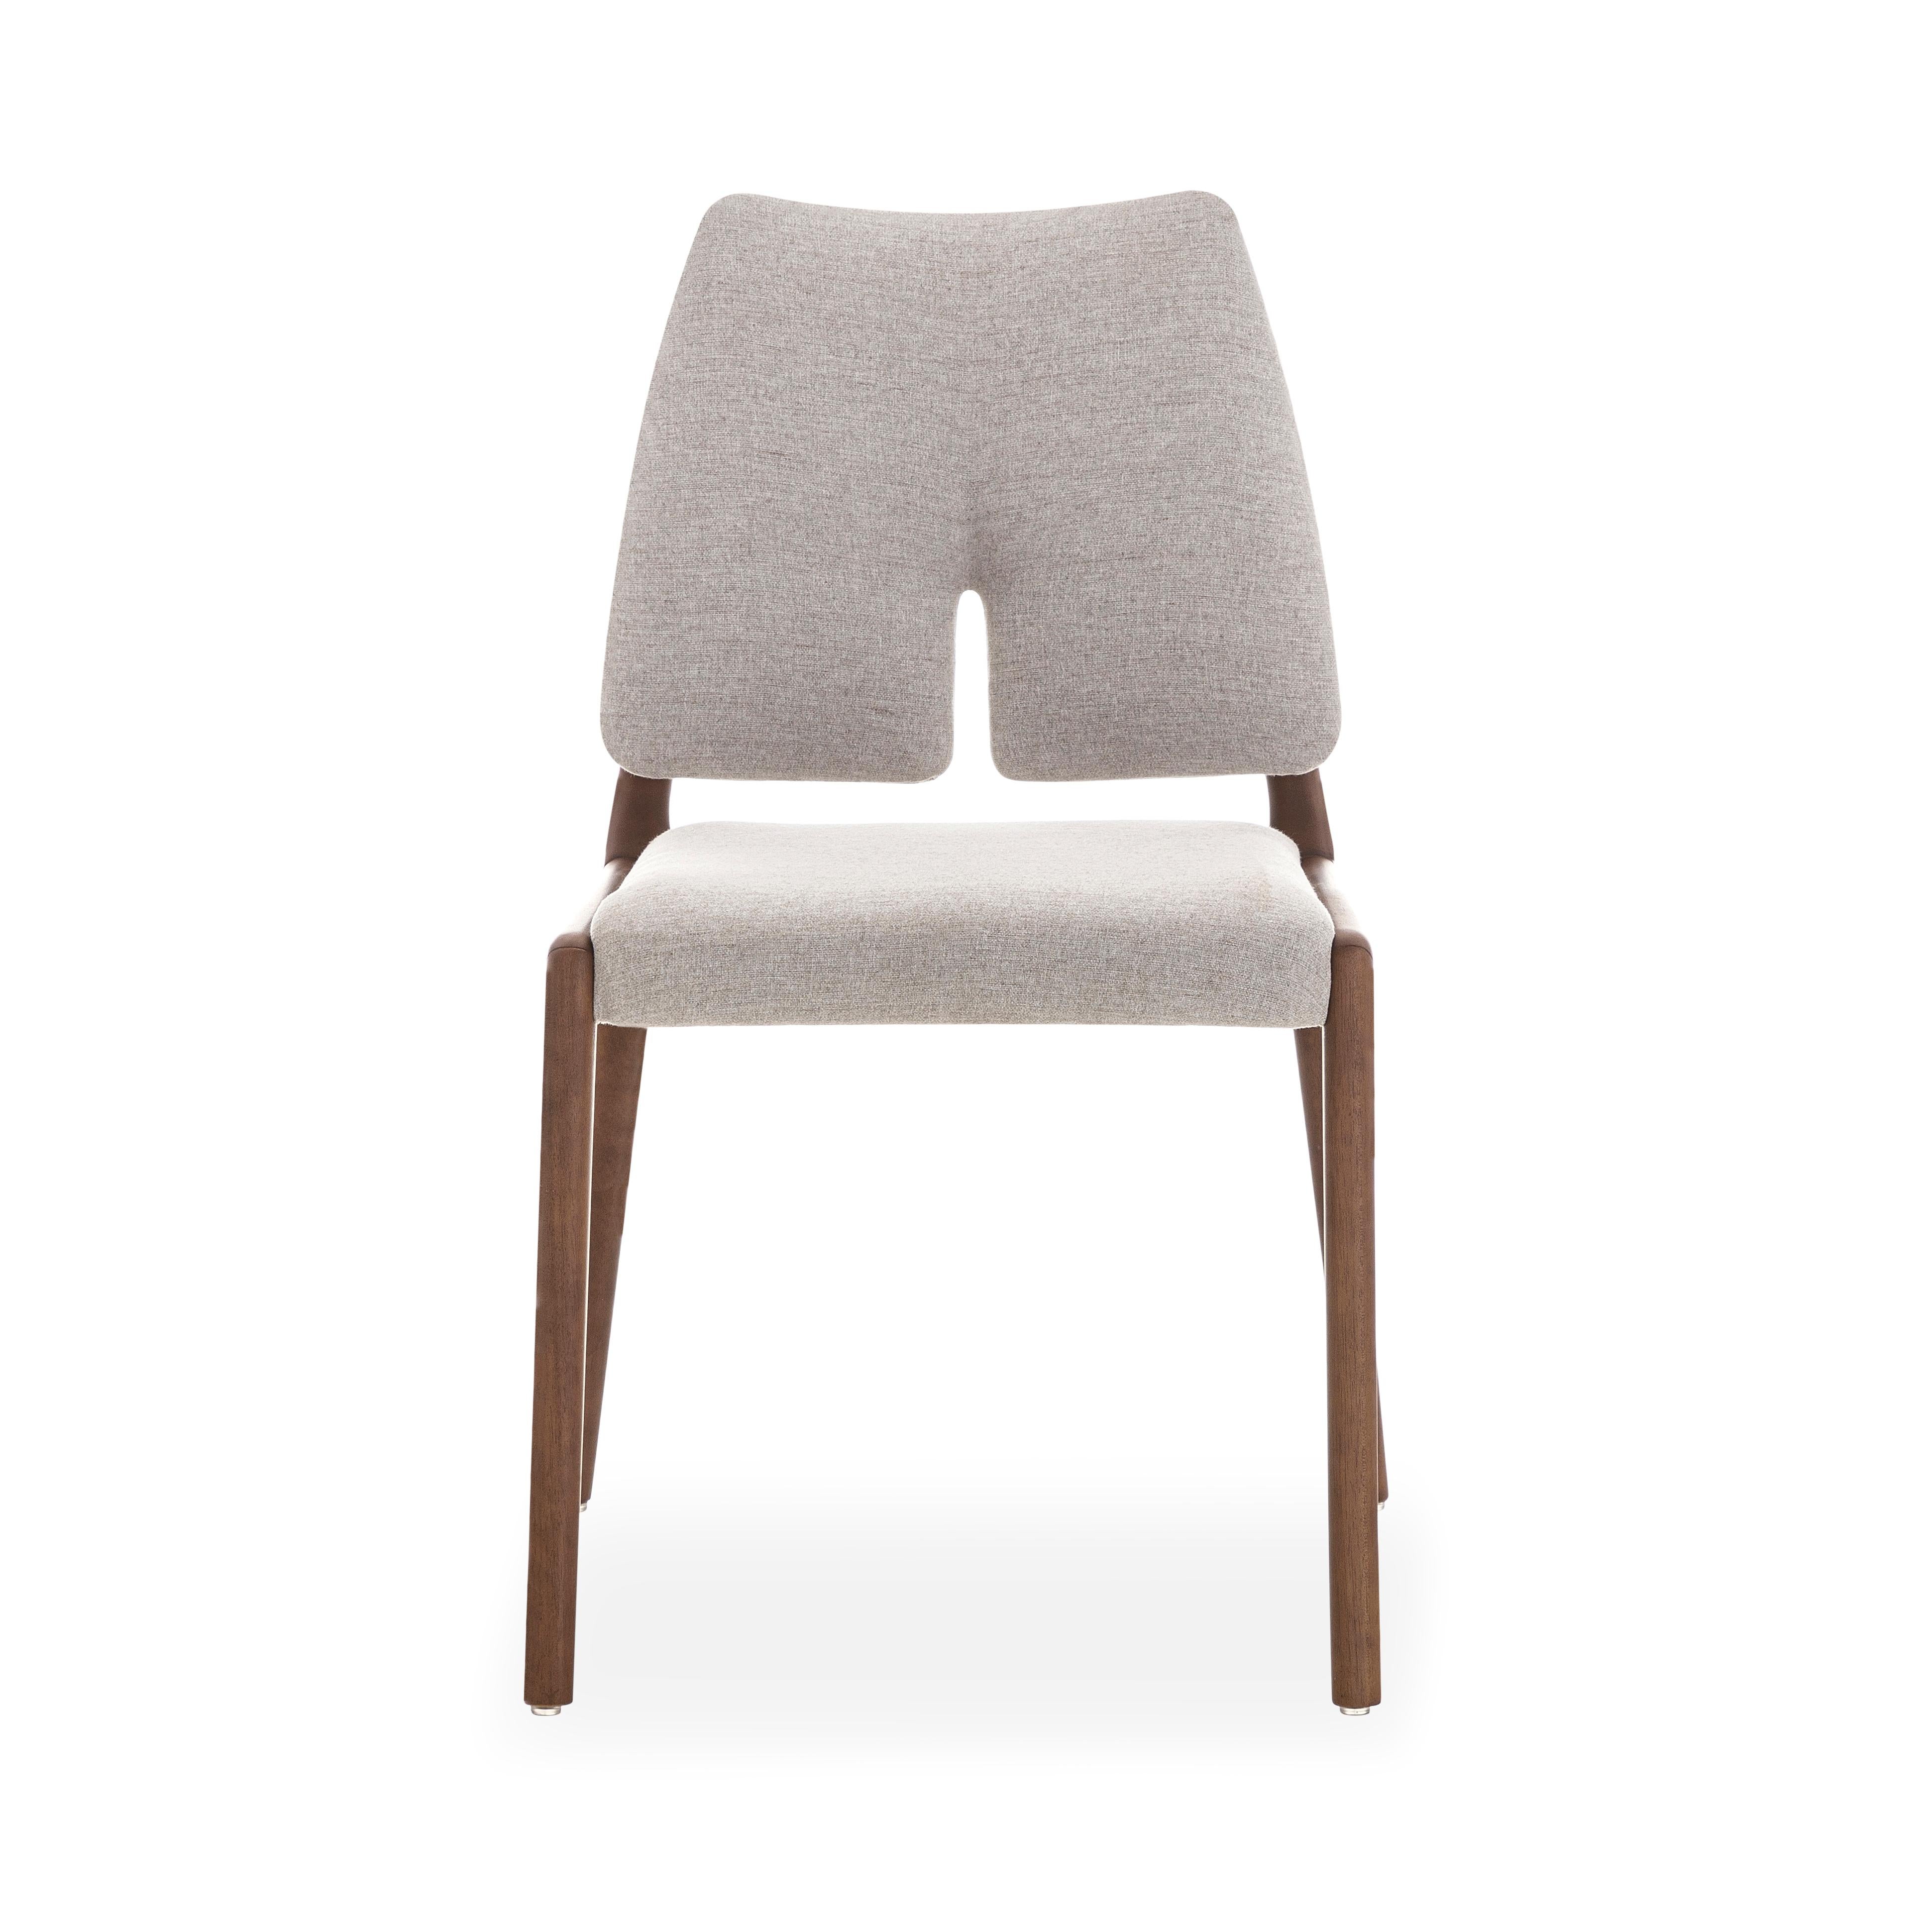 Slit Dining Chair in Walnut Wood Finish and Light Beige Cotton Fabric, Set of 2 For Sale 1